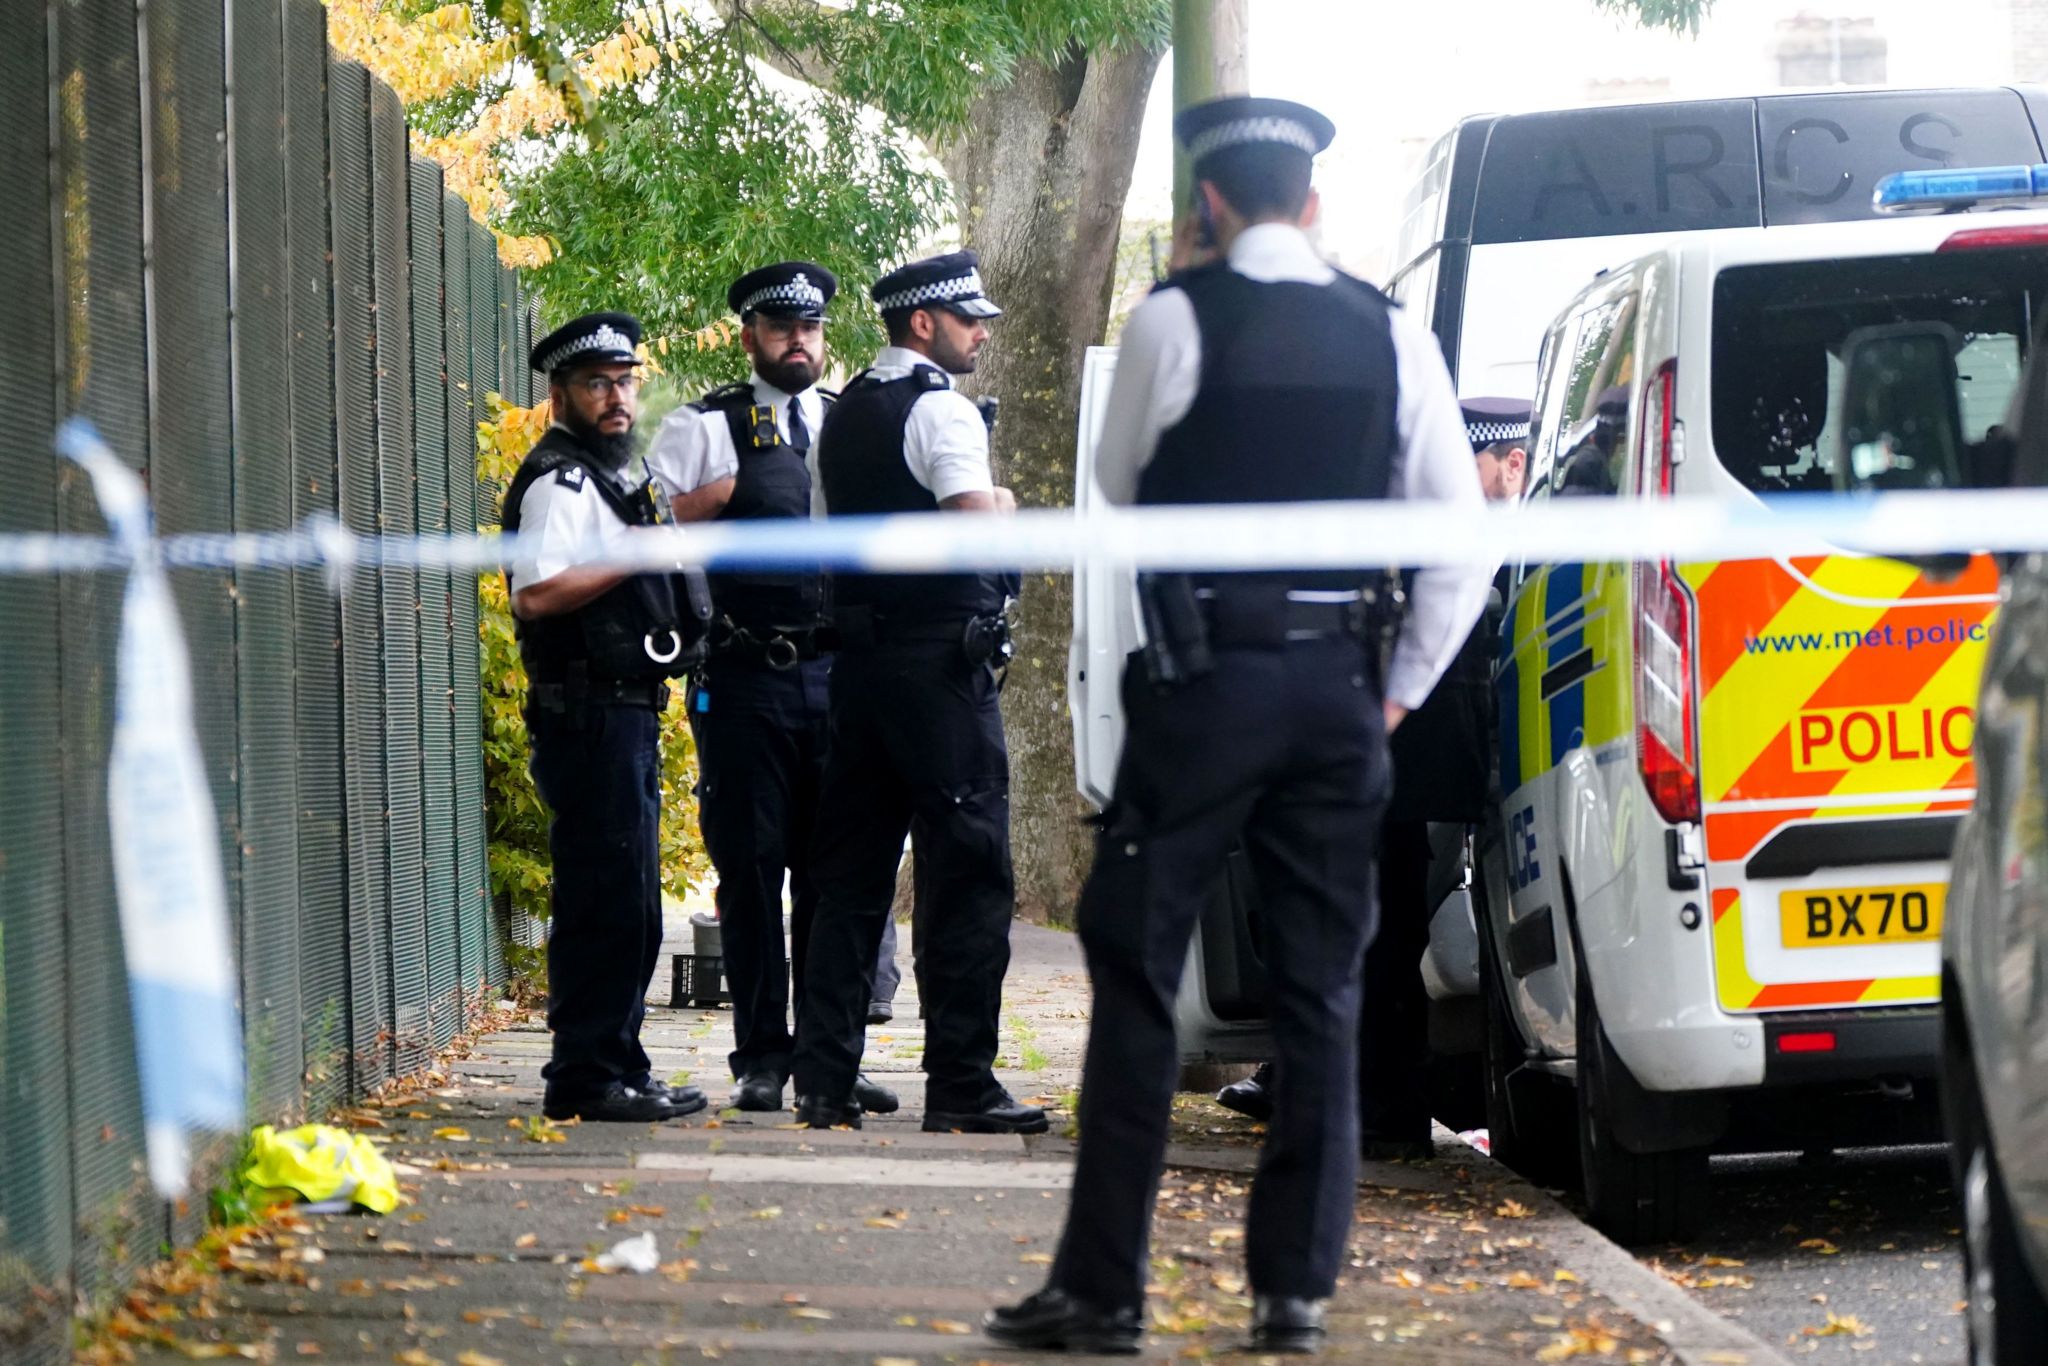 Officers standing behind police cordon at the scene of the fatal stabbing in Enfield, London